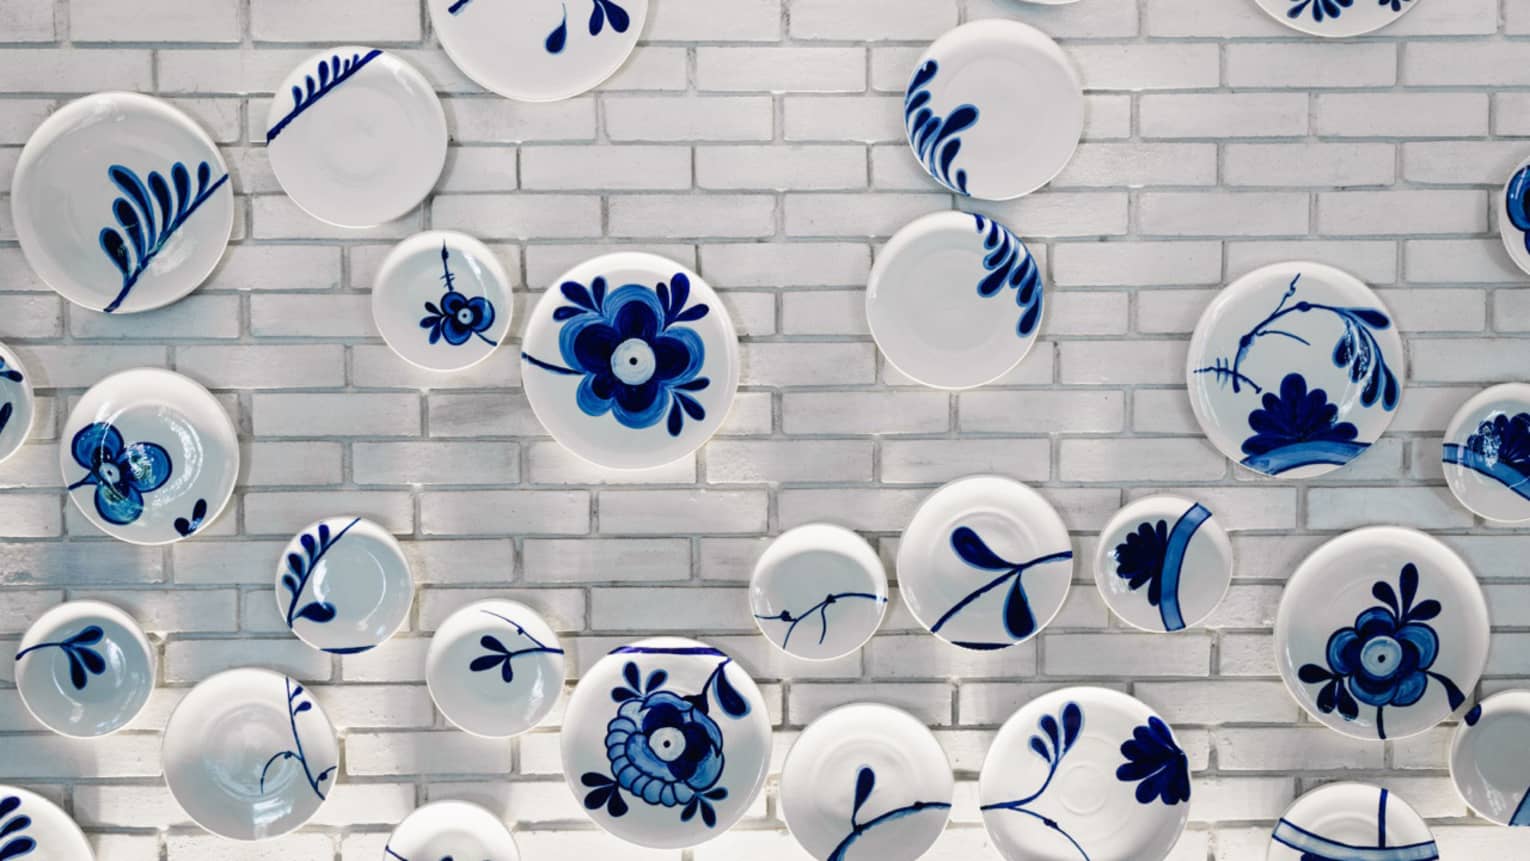 Wall art made up of various white plates painted with blue leaves and flowers hang on a white brick wall